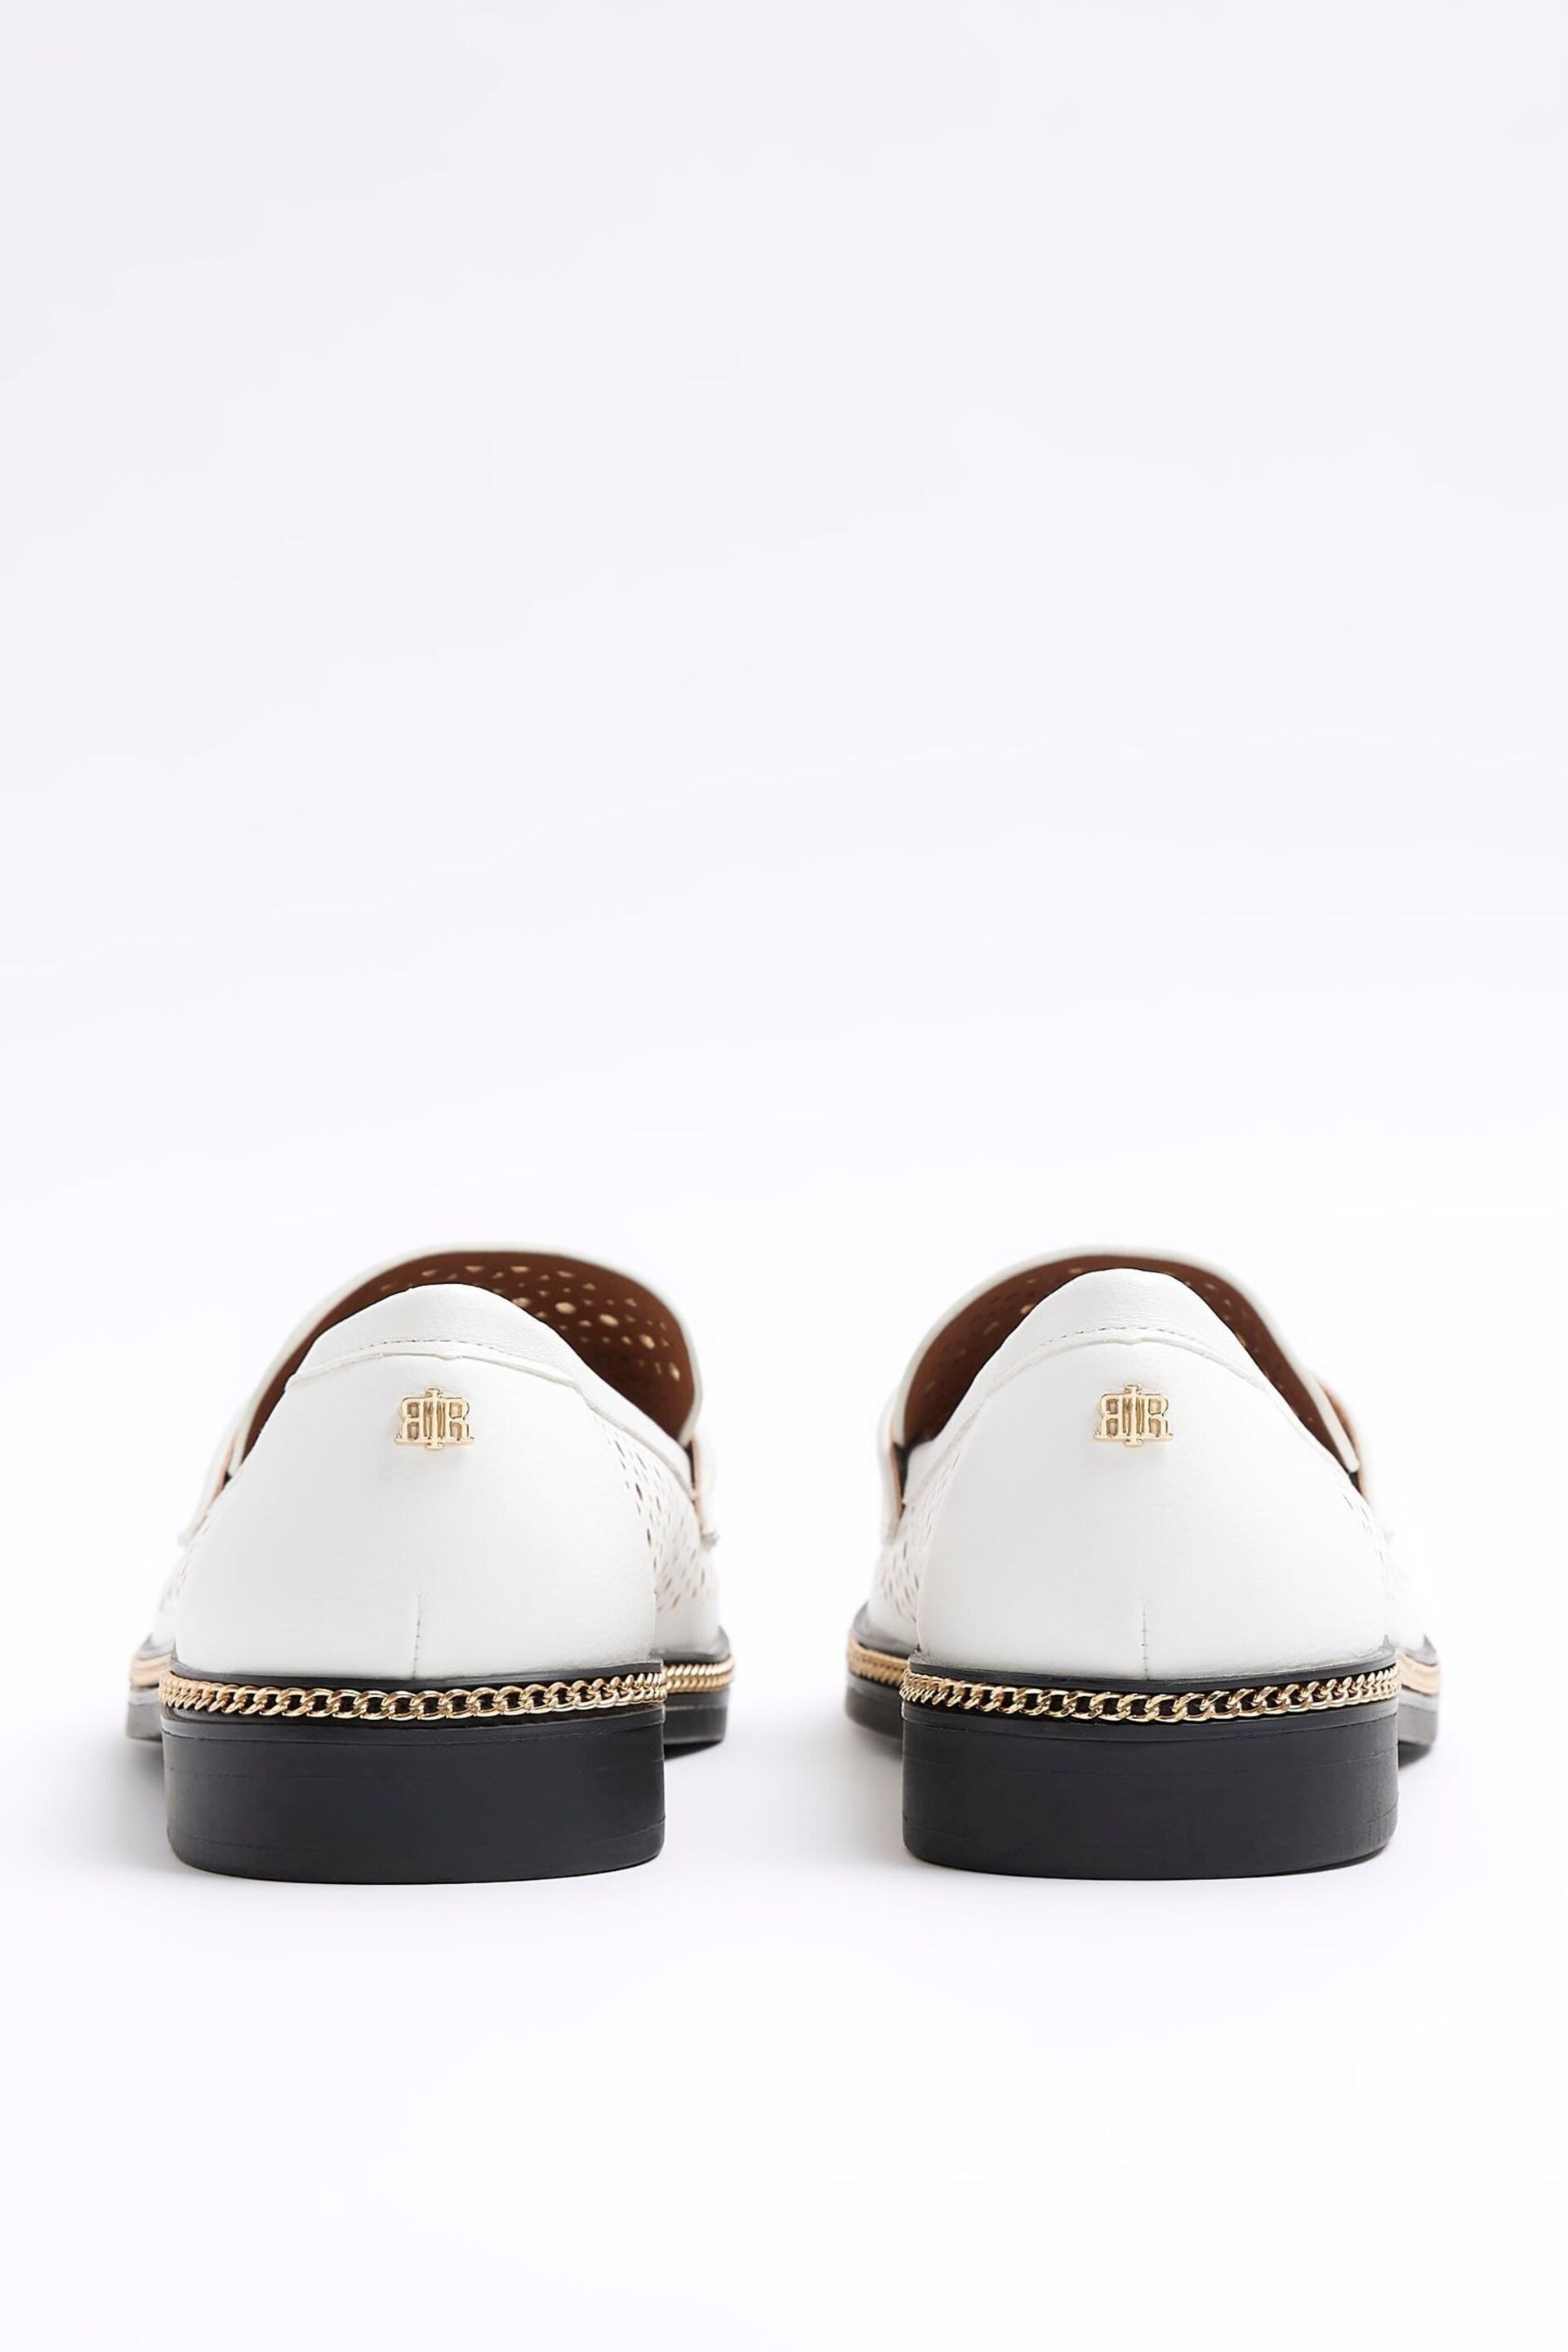 River Island White Laser Cut Tassle Loafers - Image 3 of 4